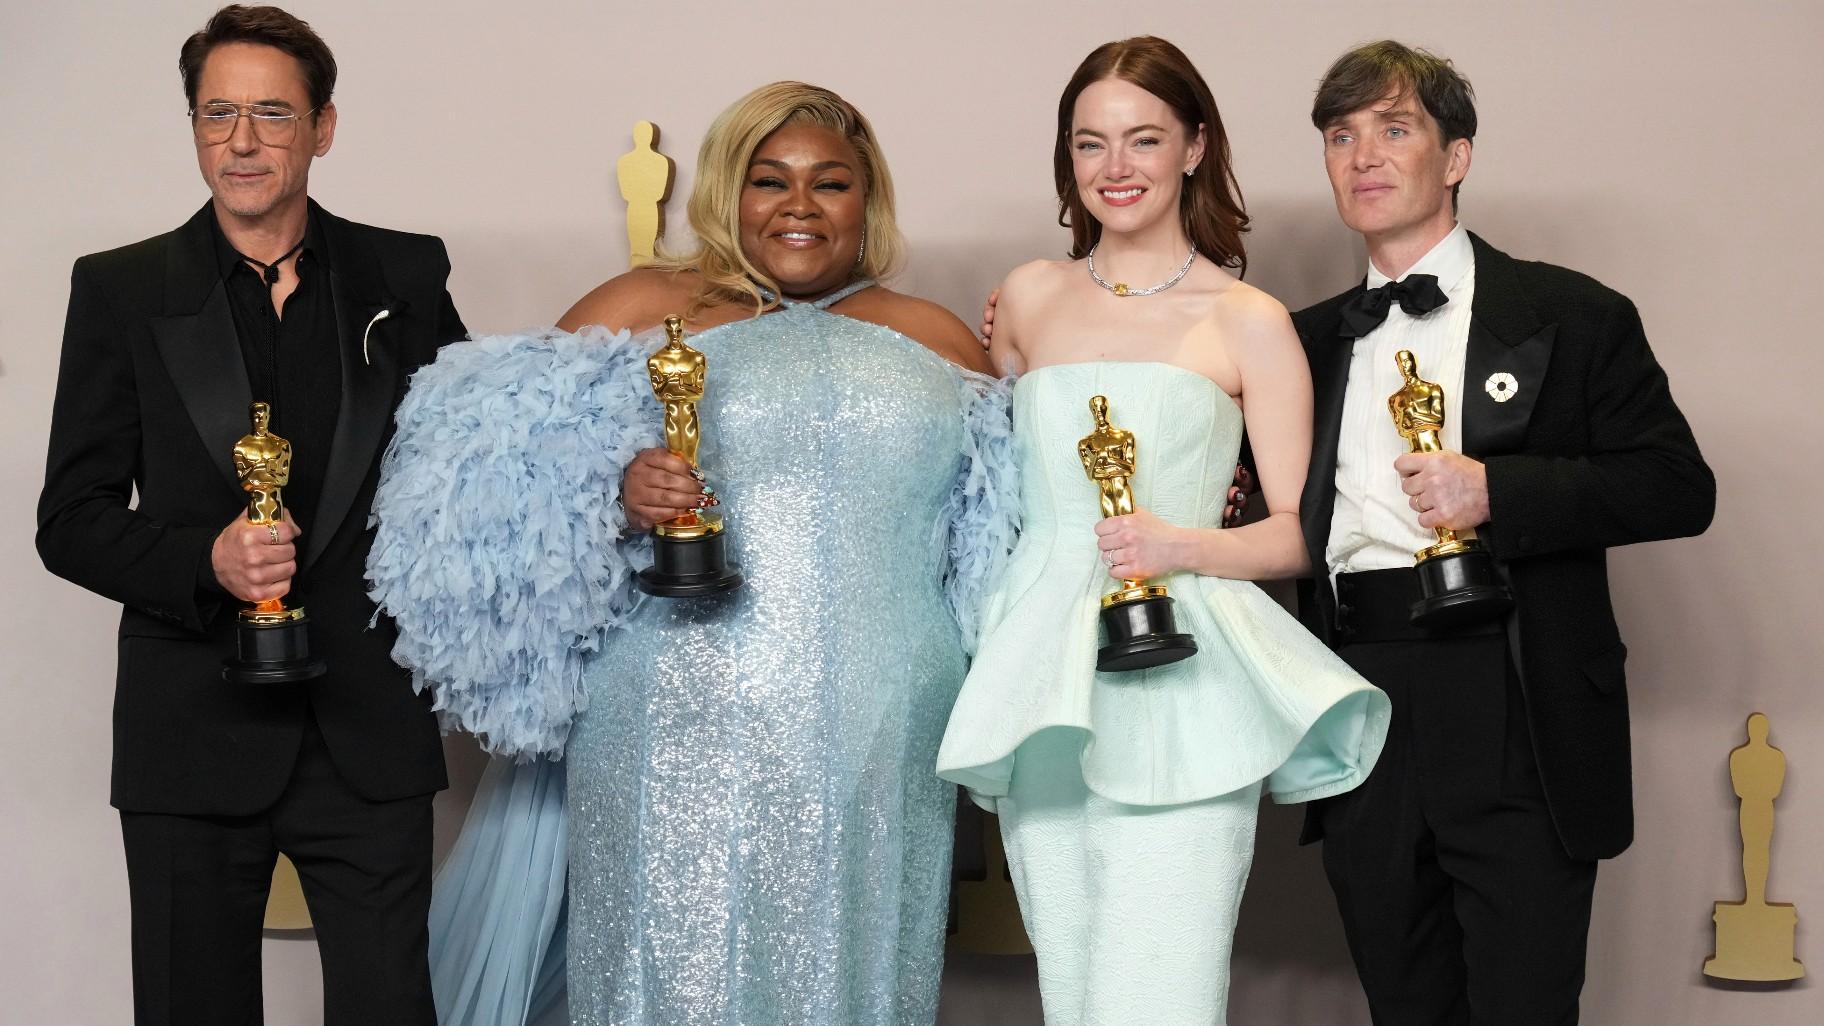 Robert Downey Jr., winner of the award for best performance by an actor in a supporting role for "Oppenheimer," from left, Da'Vine Joy Randolph, winner of the award for best performance by an actress in a supporting role for "The Holdovers," Emma Stone, winner of the award for best performance by an actress in a leading role for "Poor Things," and Cillian Murphy, winner of the award for best performance by an actor in a leading role for "Oppenheimer," pose in the press room at the Oscars on Sunday, March 10